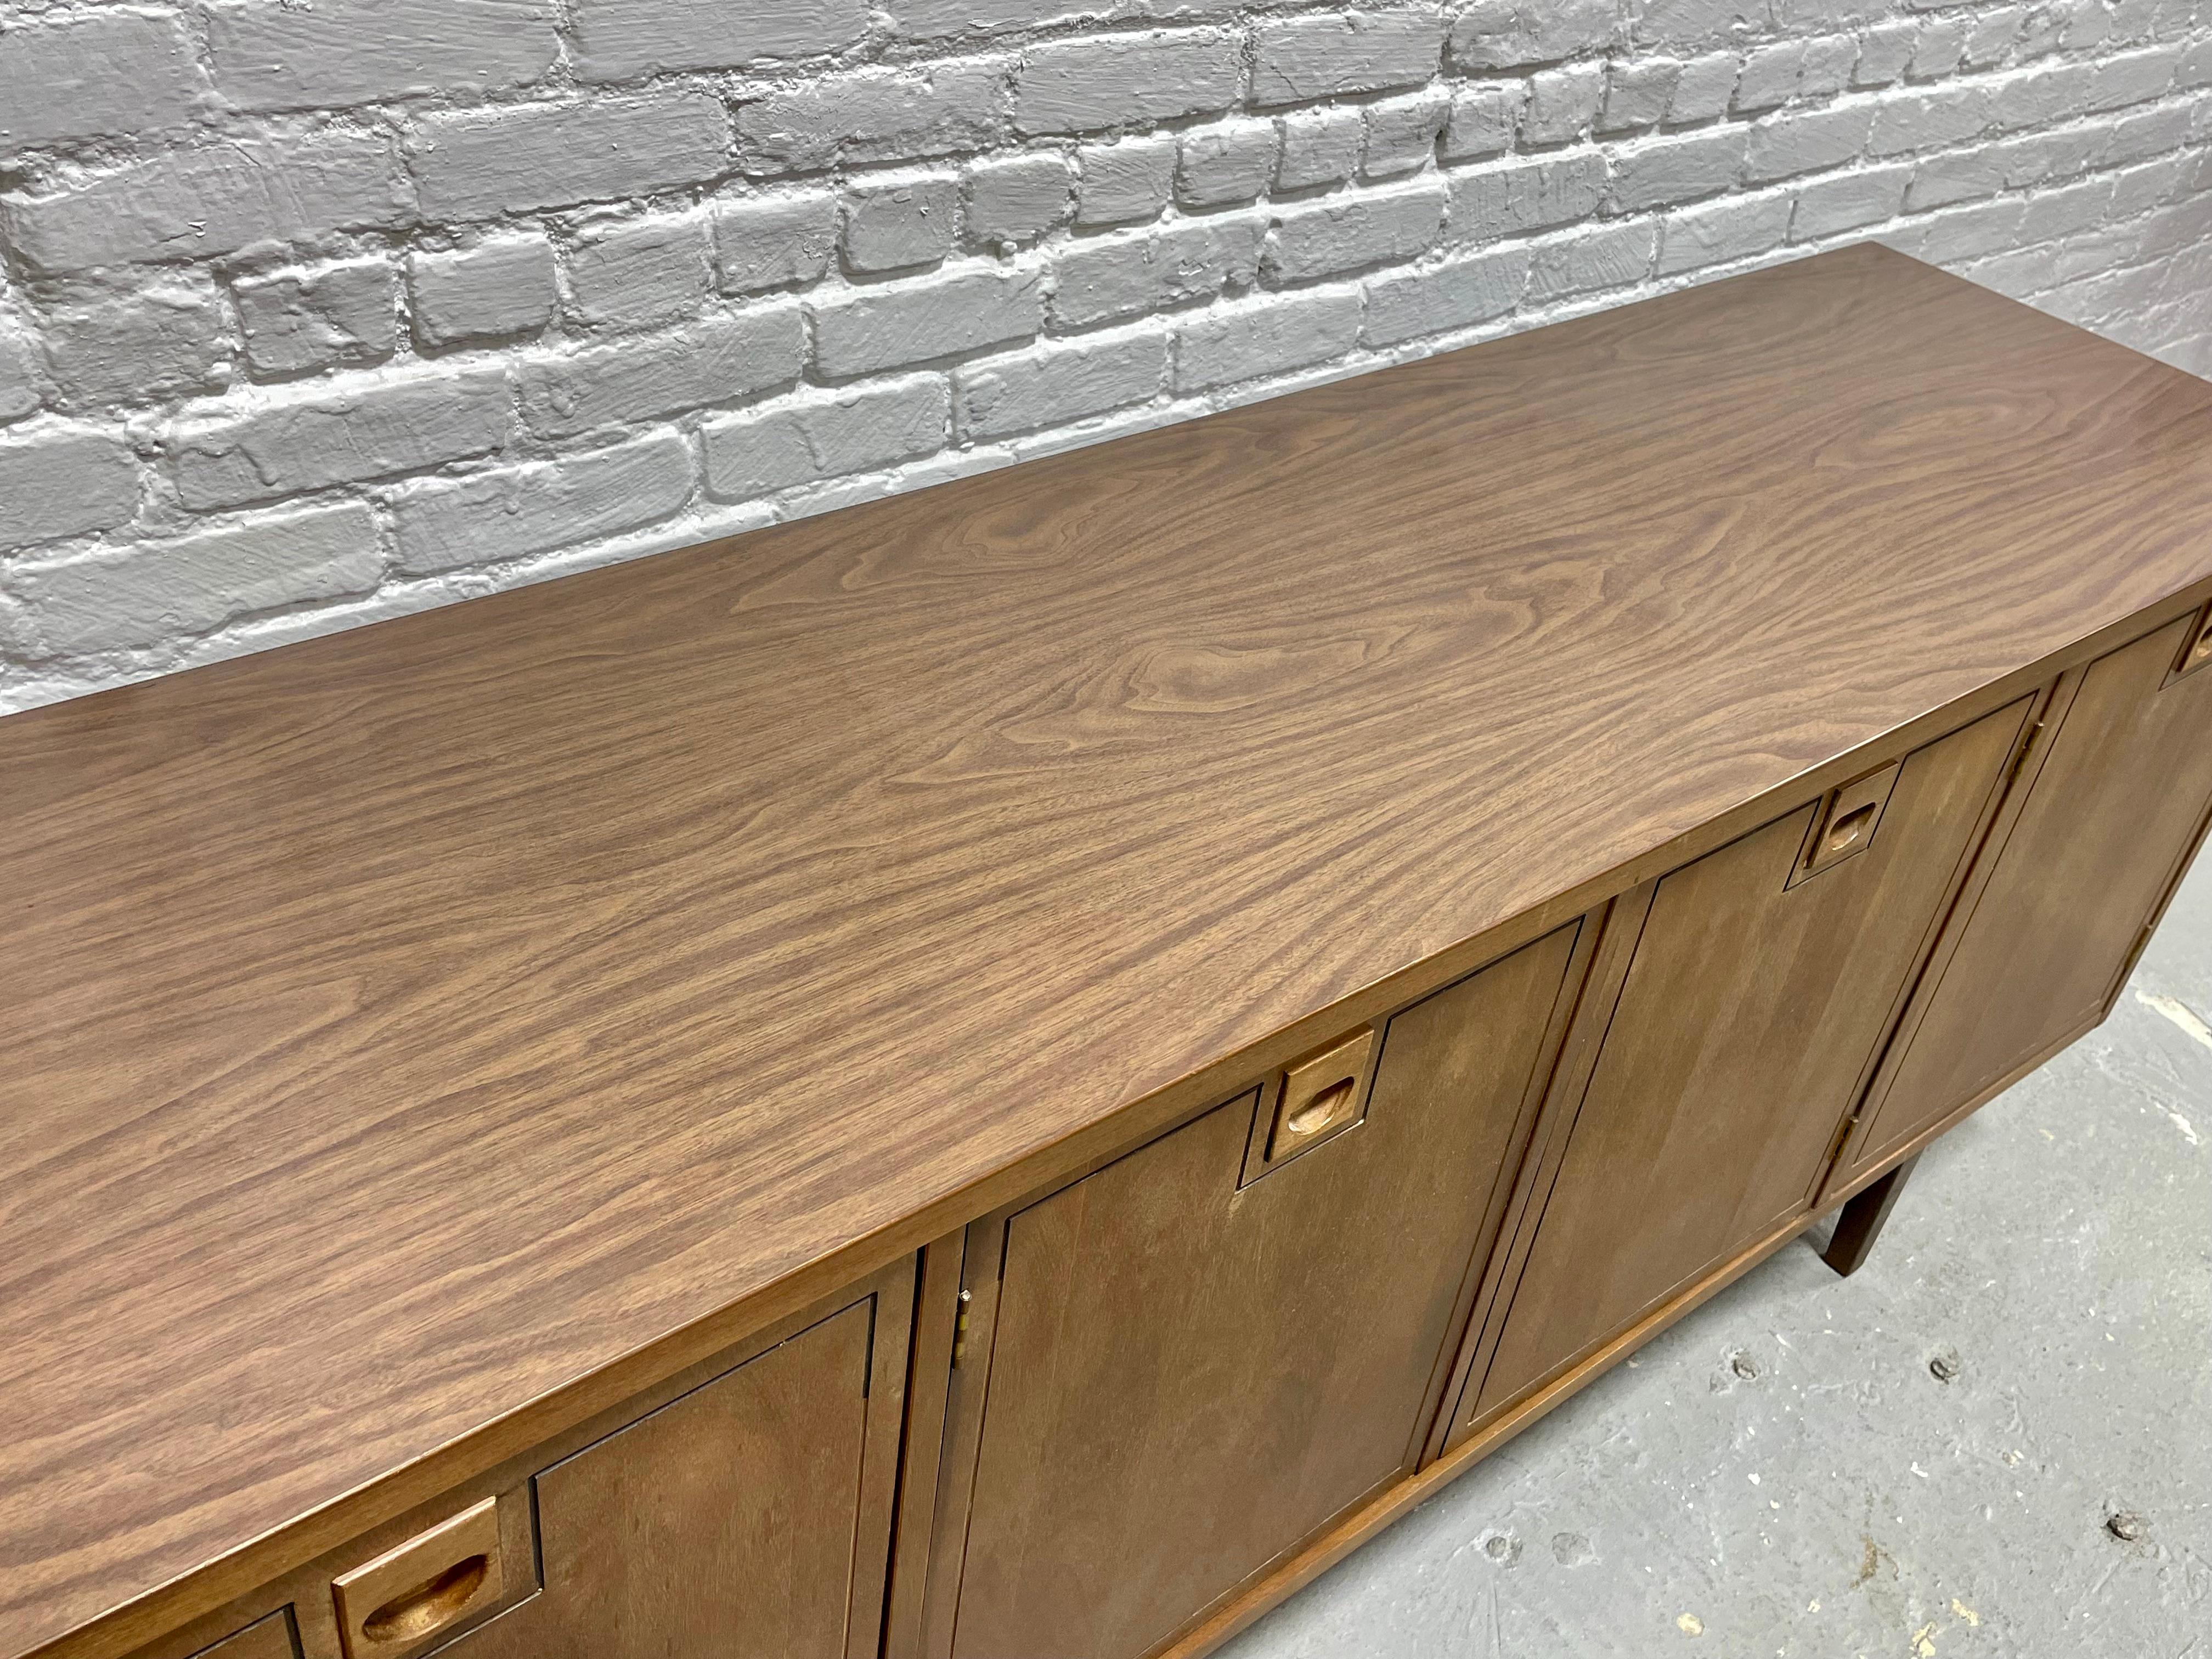 Simple + Classic Mid Century Modern Walnut Credenza / Media Stand designed by Stanley Furniture Co., c. 1960's. This classic credenza features a simple front panel design behind which is a perfect layout for a media stand - generous shelving for